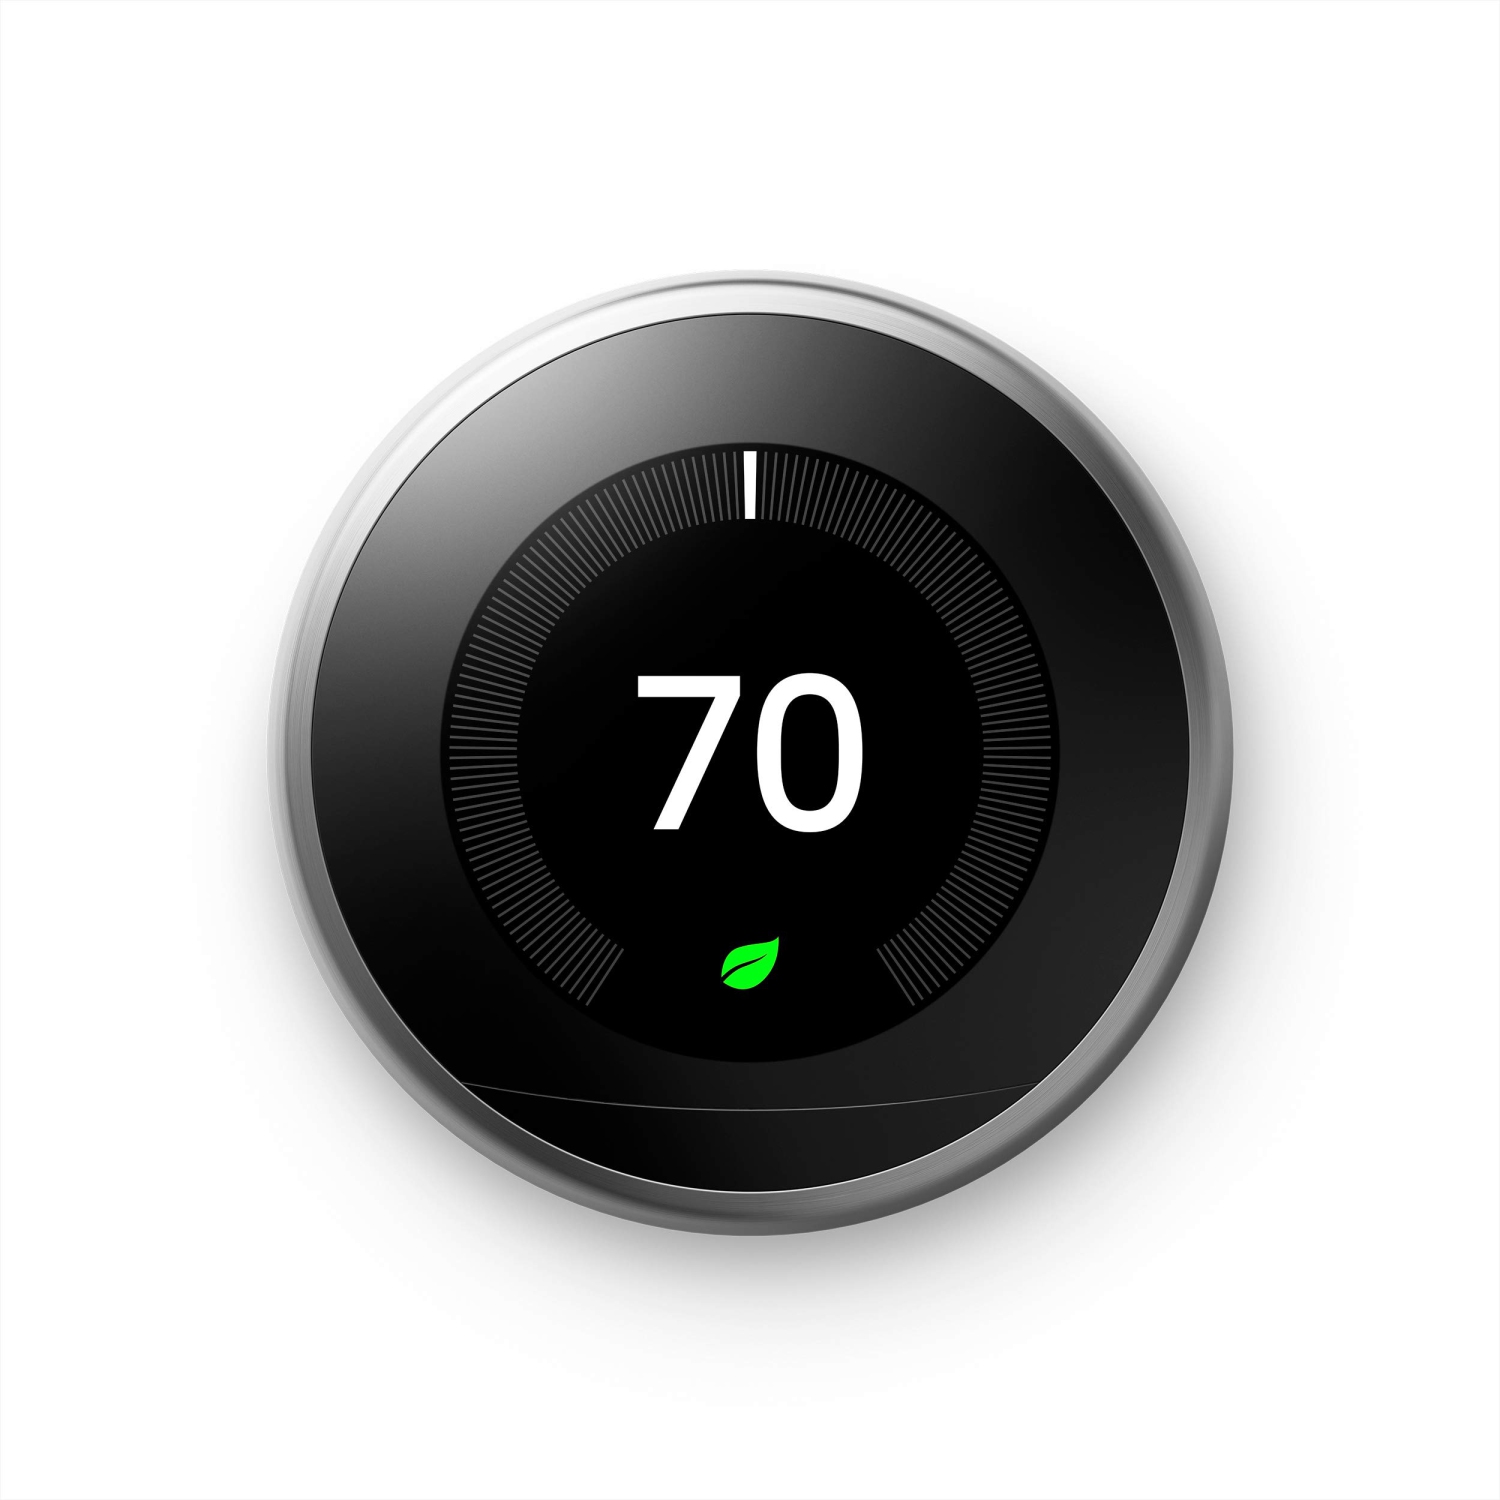 Google Nest Learning Thermostat - Programmable Smart Thermostat for Home - 3rd Generation Nest Thermostat - Compatible with Alexa - Stainless Steel